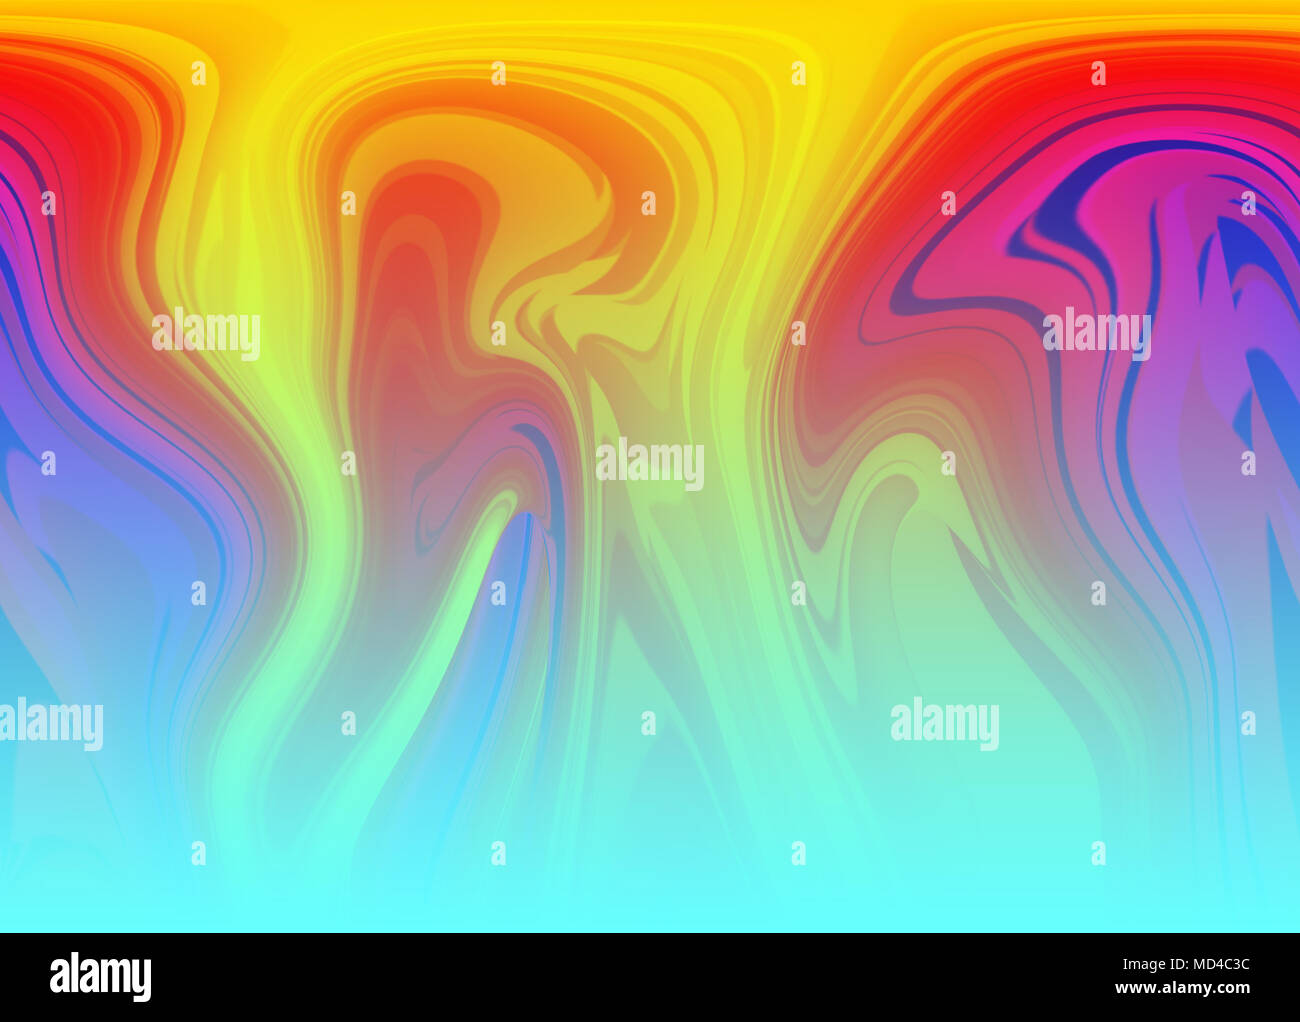 Abstract Sfondi Psichedelici Foto Stock Alamy